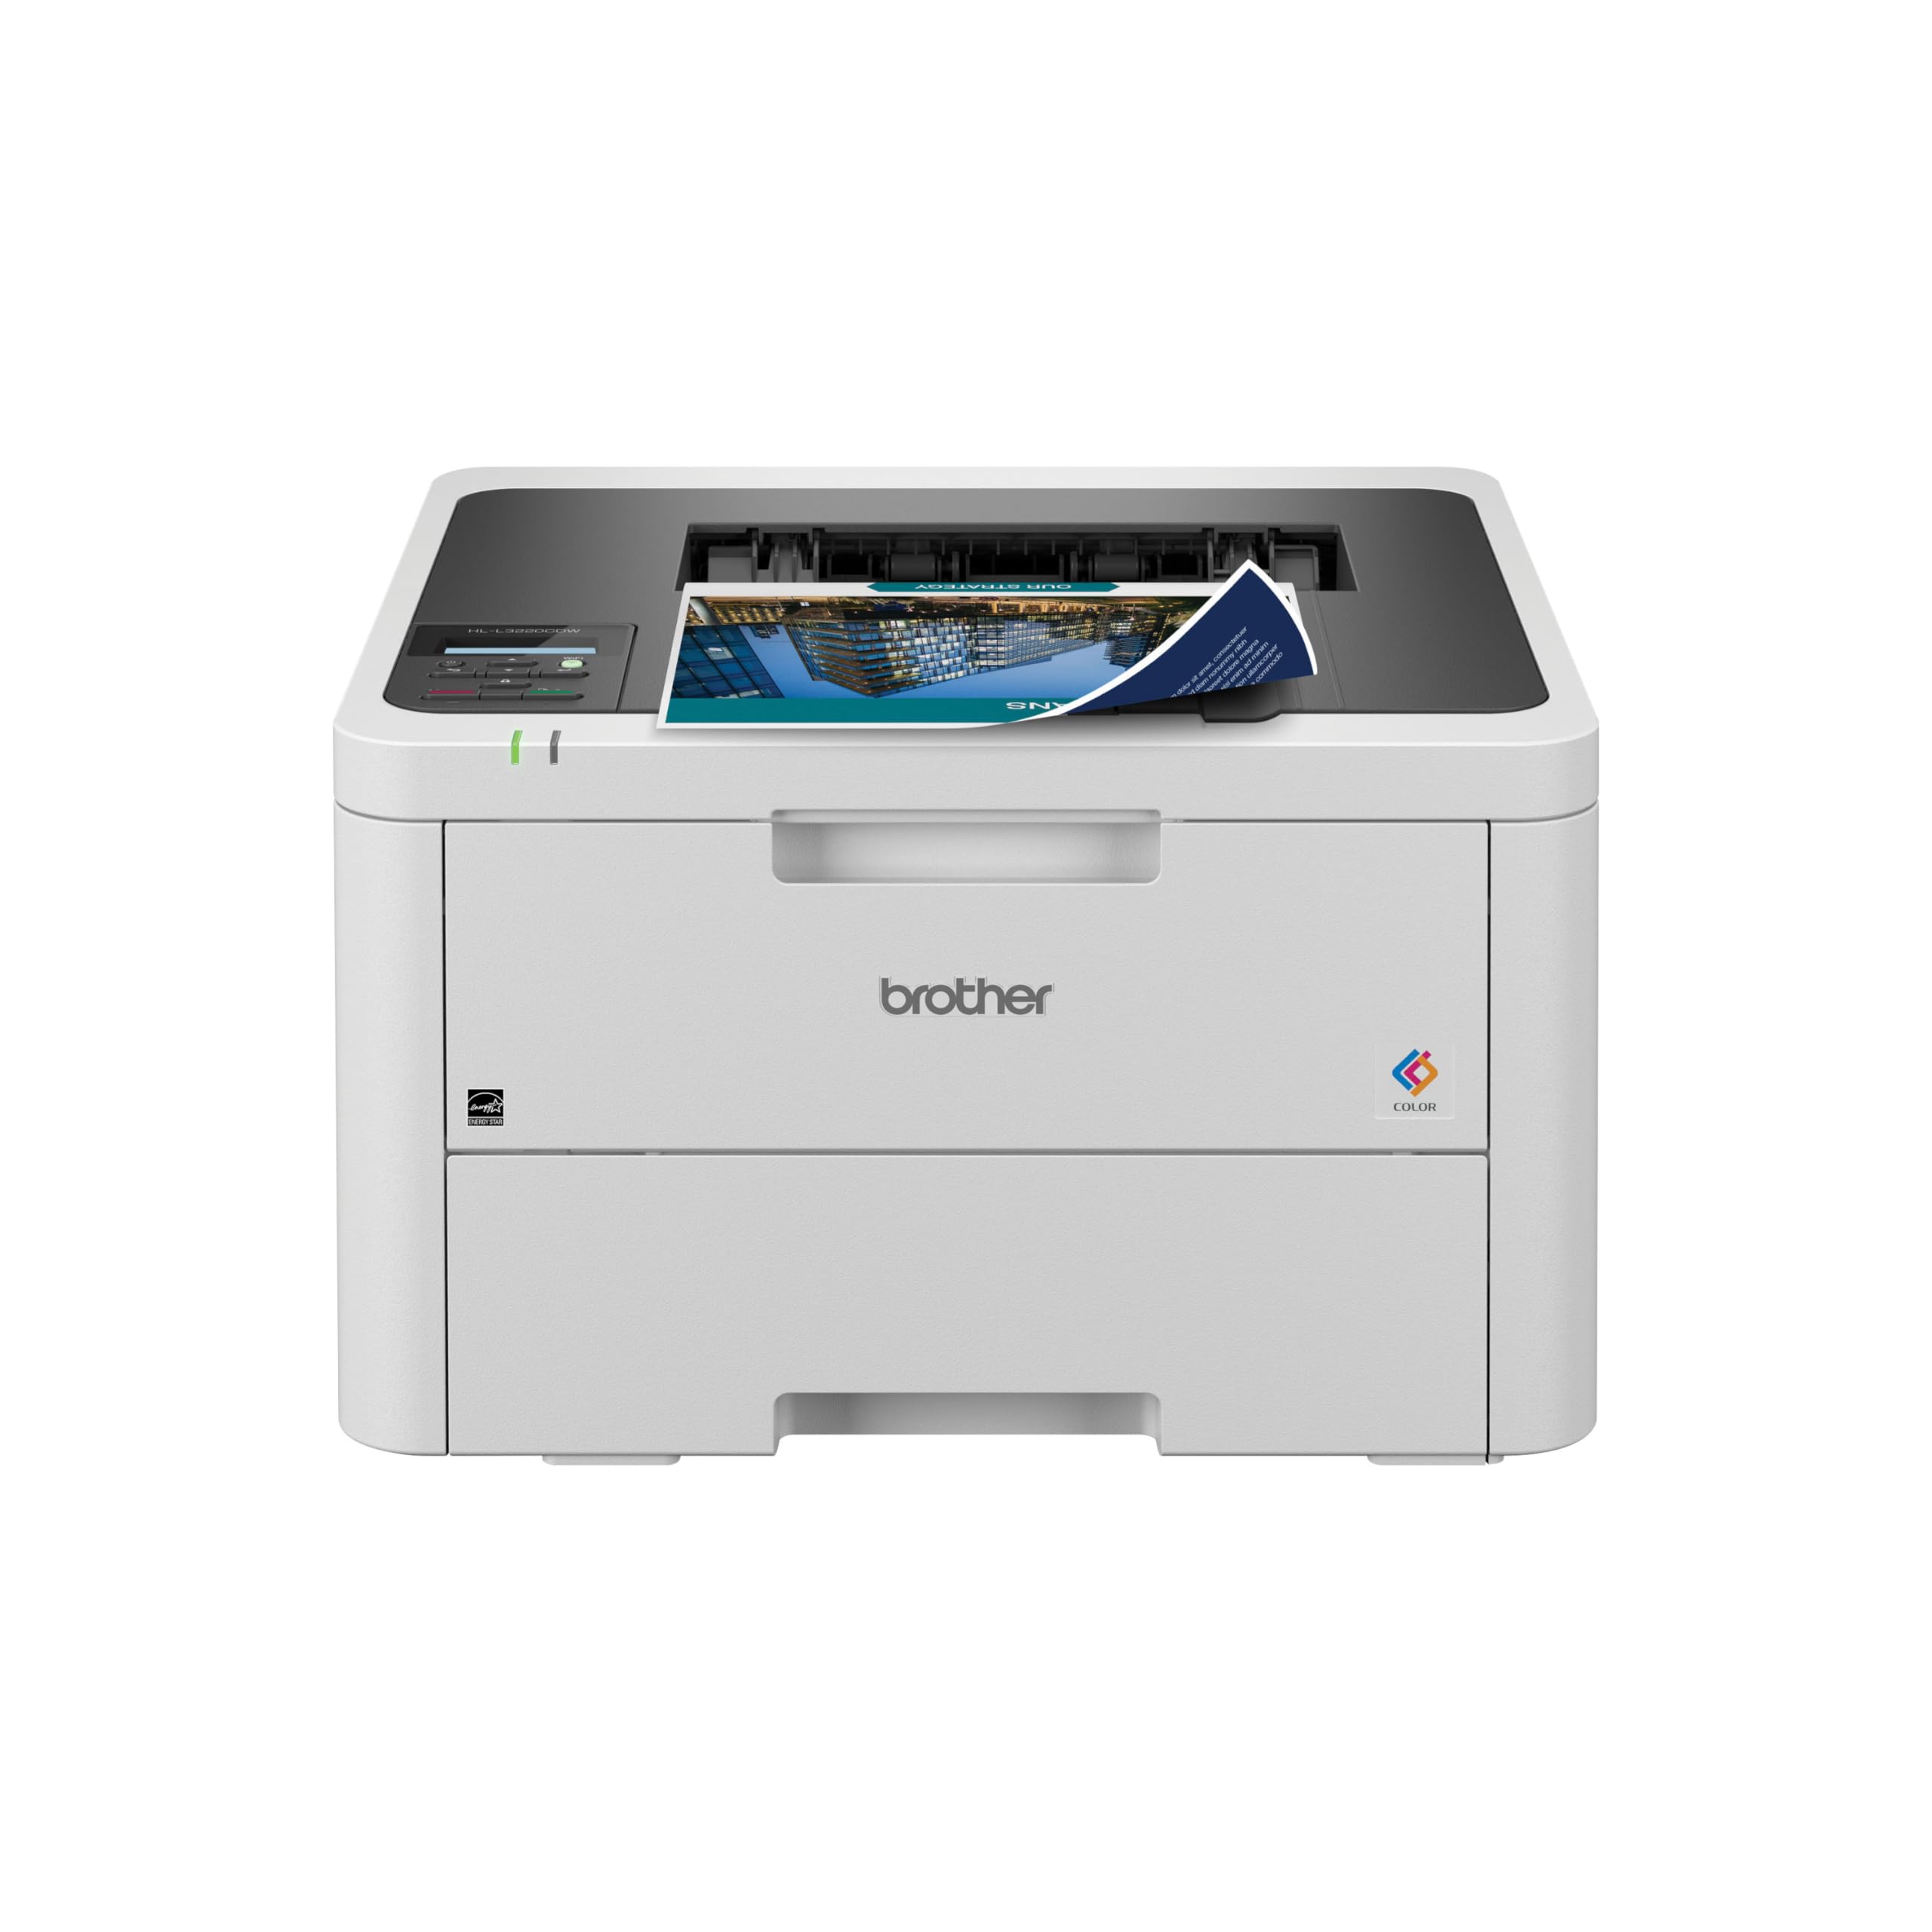 Brother HL-L3220CDW Wireless Compact Digital Color Printer with Laser Quality Output, Duplex and Mobile Device Printing | Includes 4 Month Refresh Subscription Trial¹, Amazon Dash Replenishment Ready